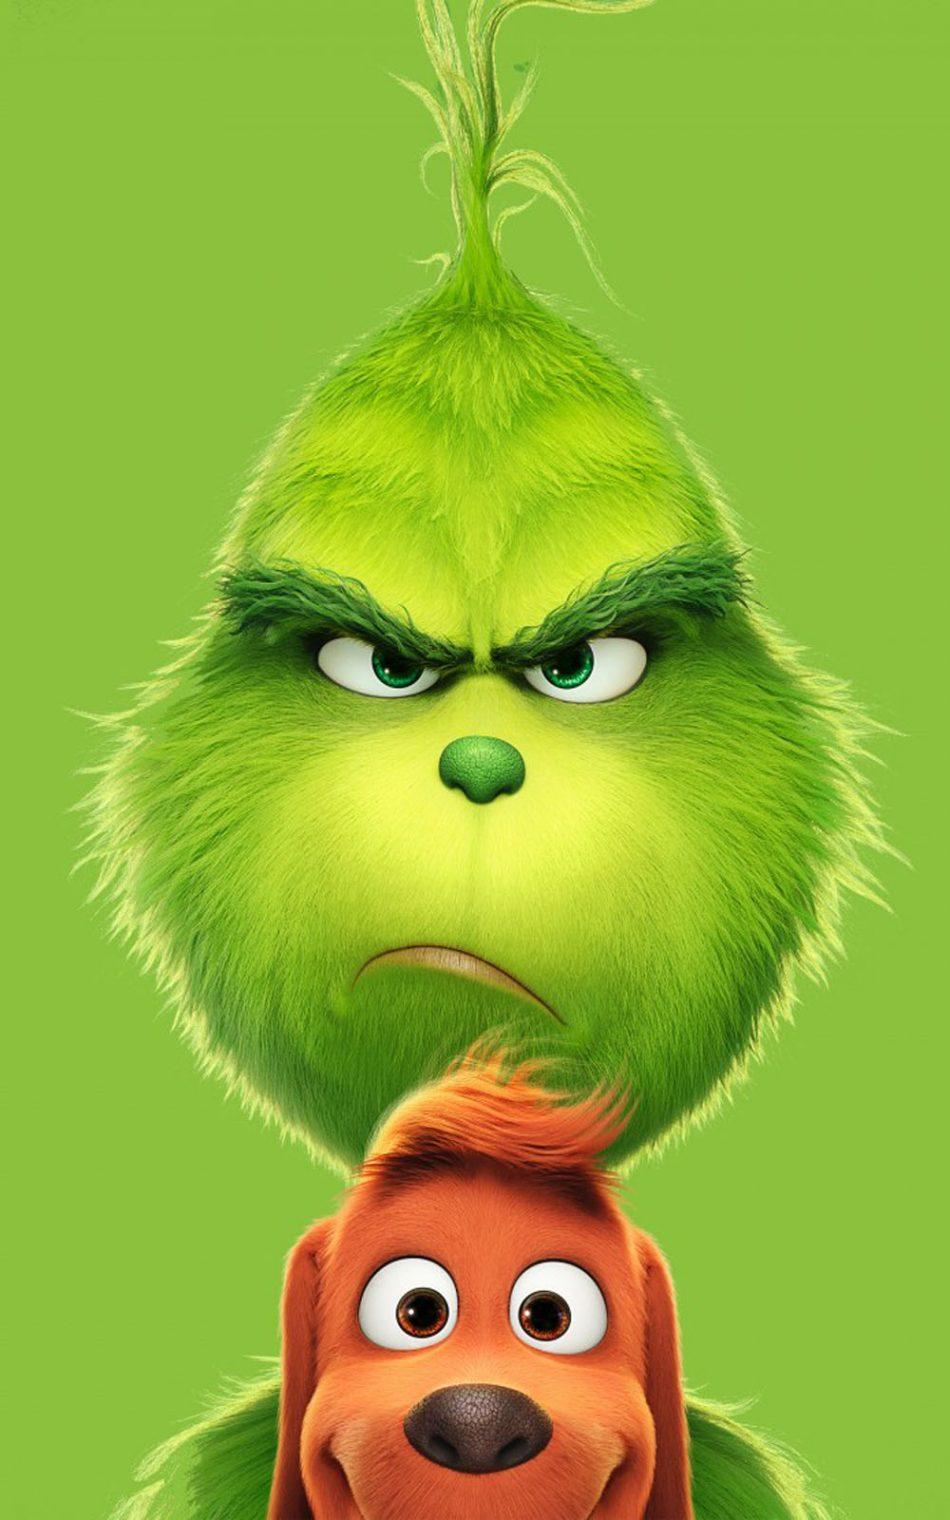 Download The Grinch Animation Comedy 2018 Free Pure 4K Ultra